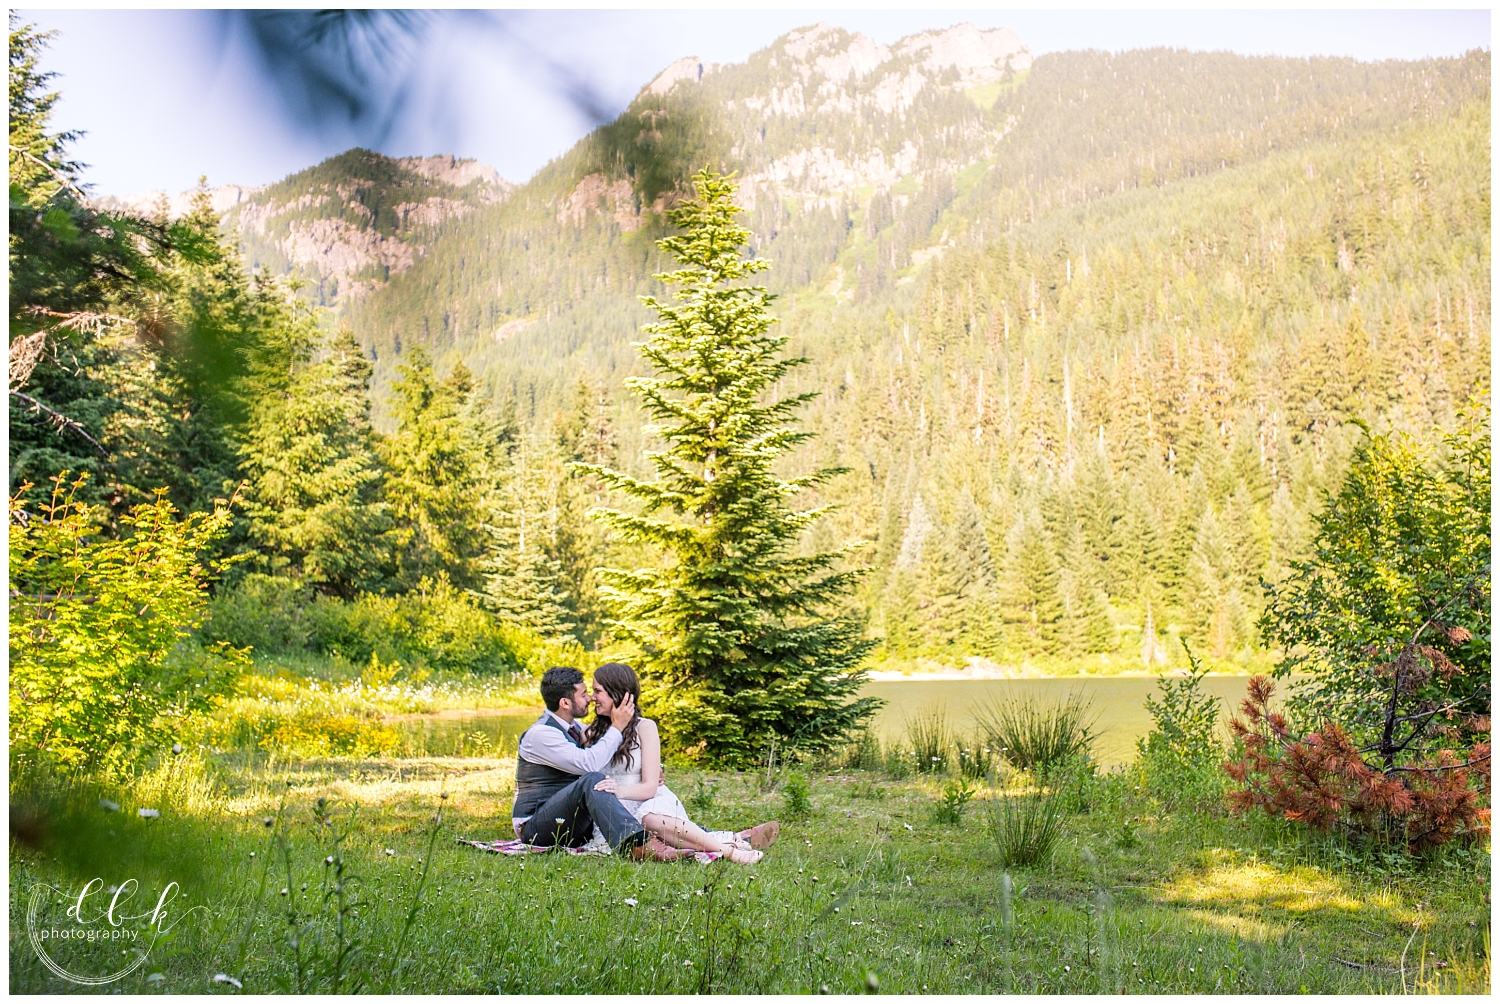 couple sitting in the grass by the water and mountains at Gold Creek Pond in Washington